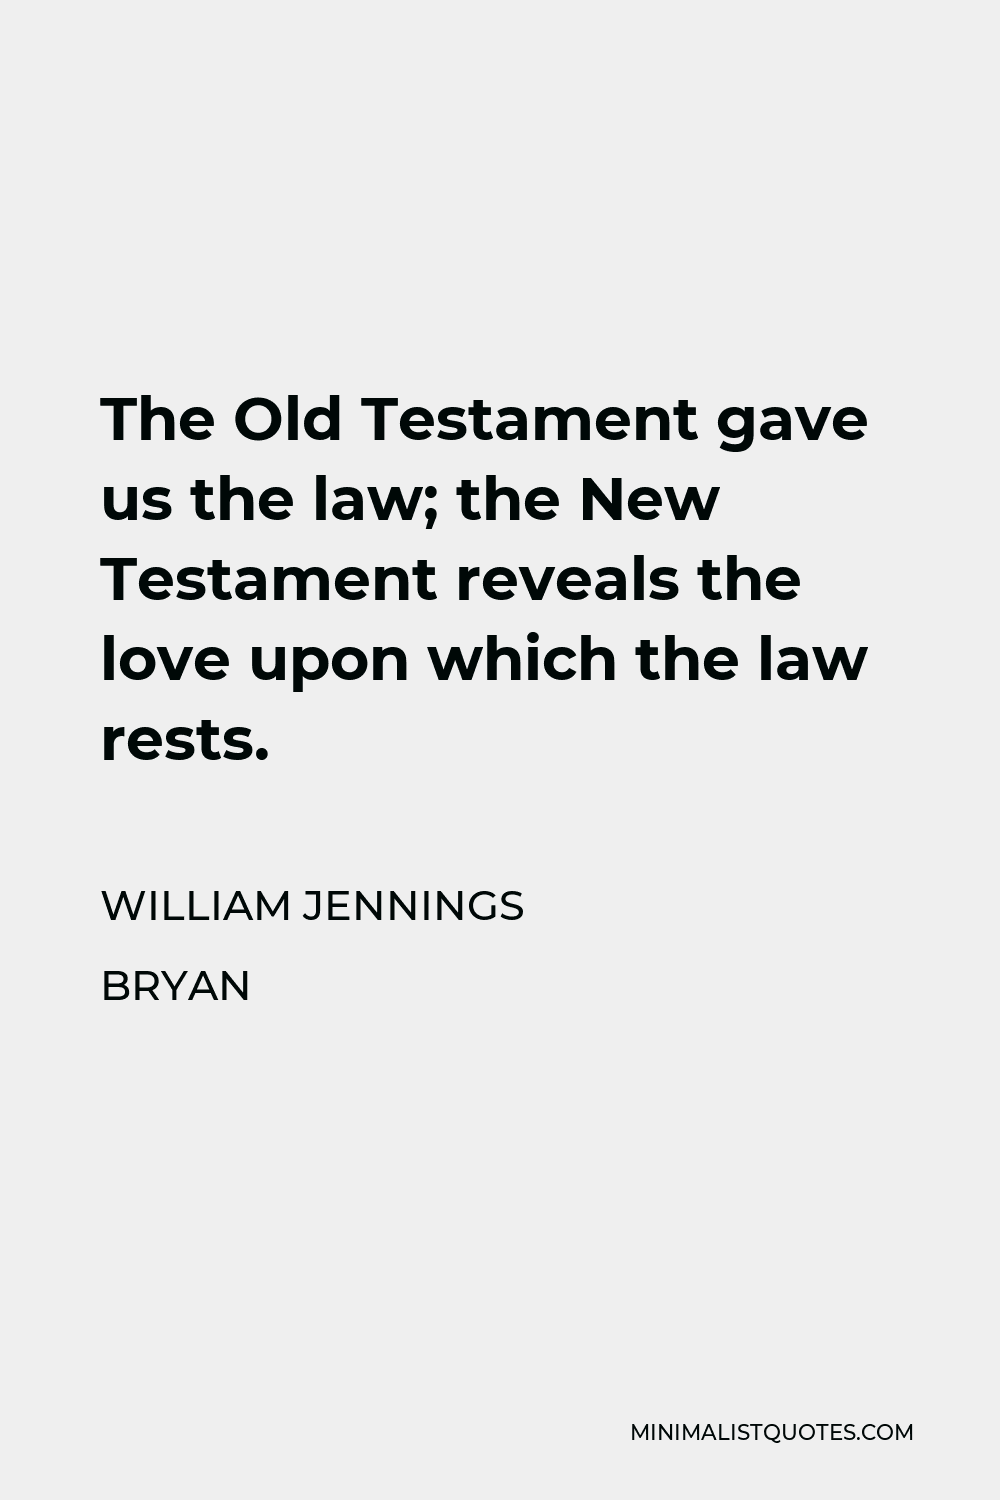 William Jennings Bryan Quote - The Old Testament gave us the law; the New Testament reveals the love upon which the law rests.